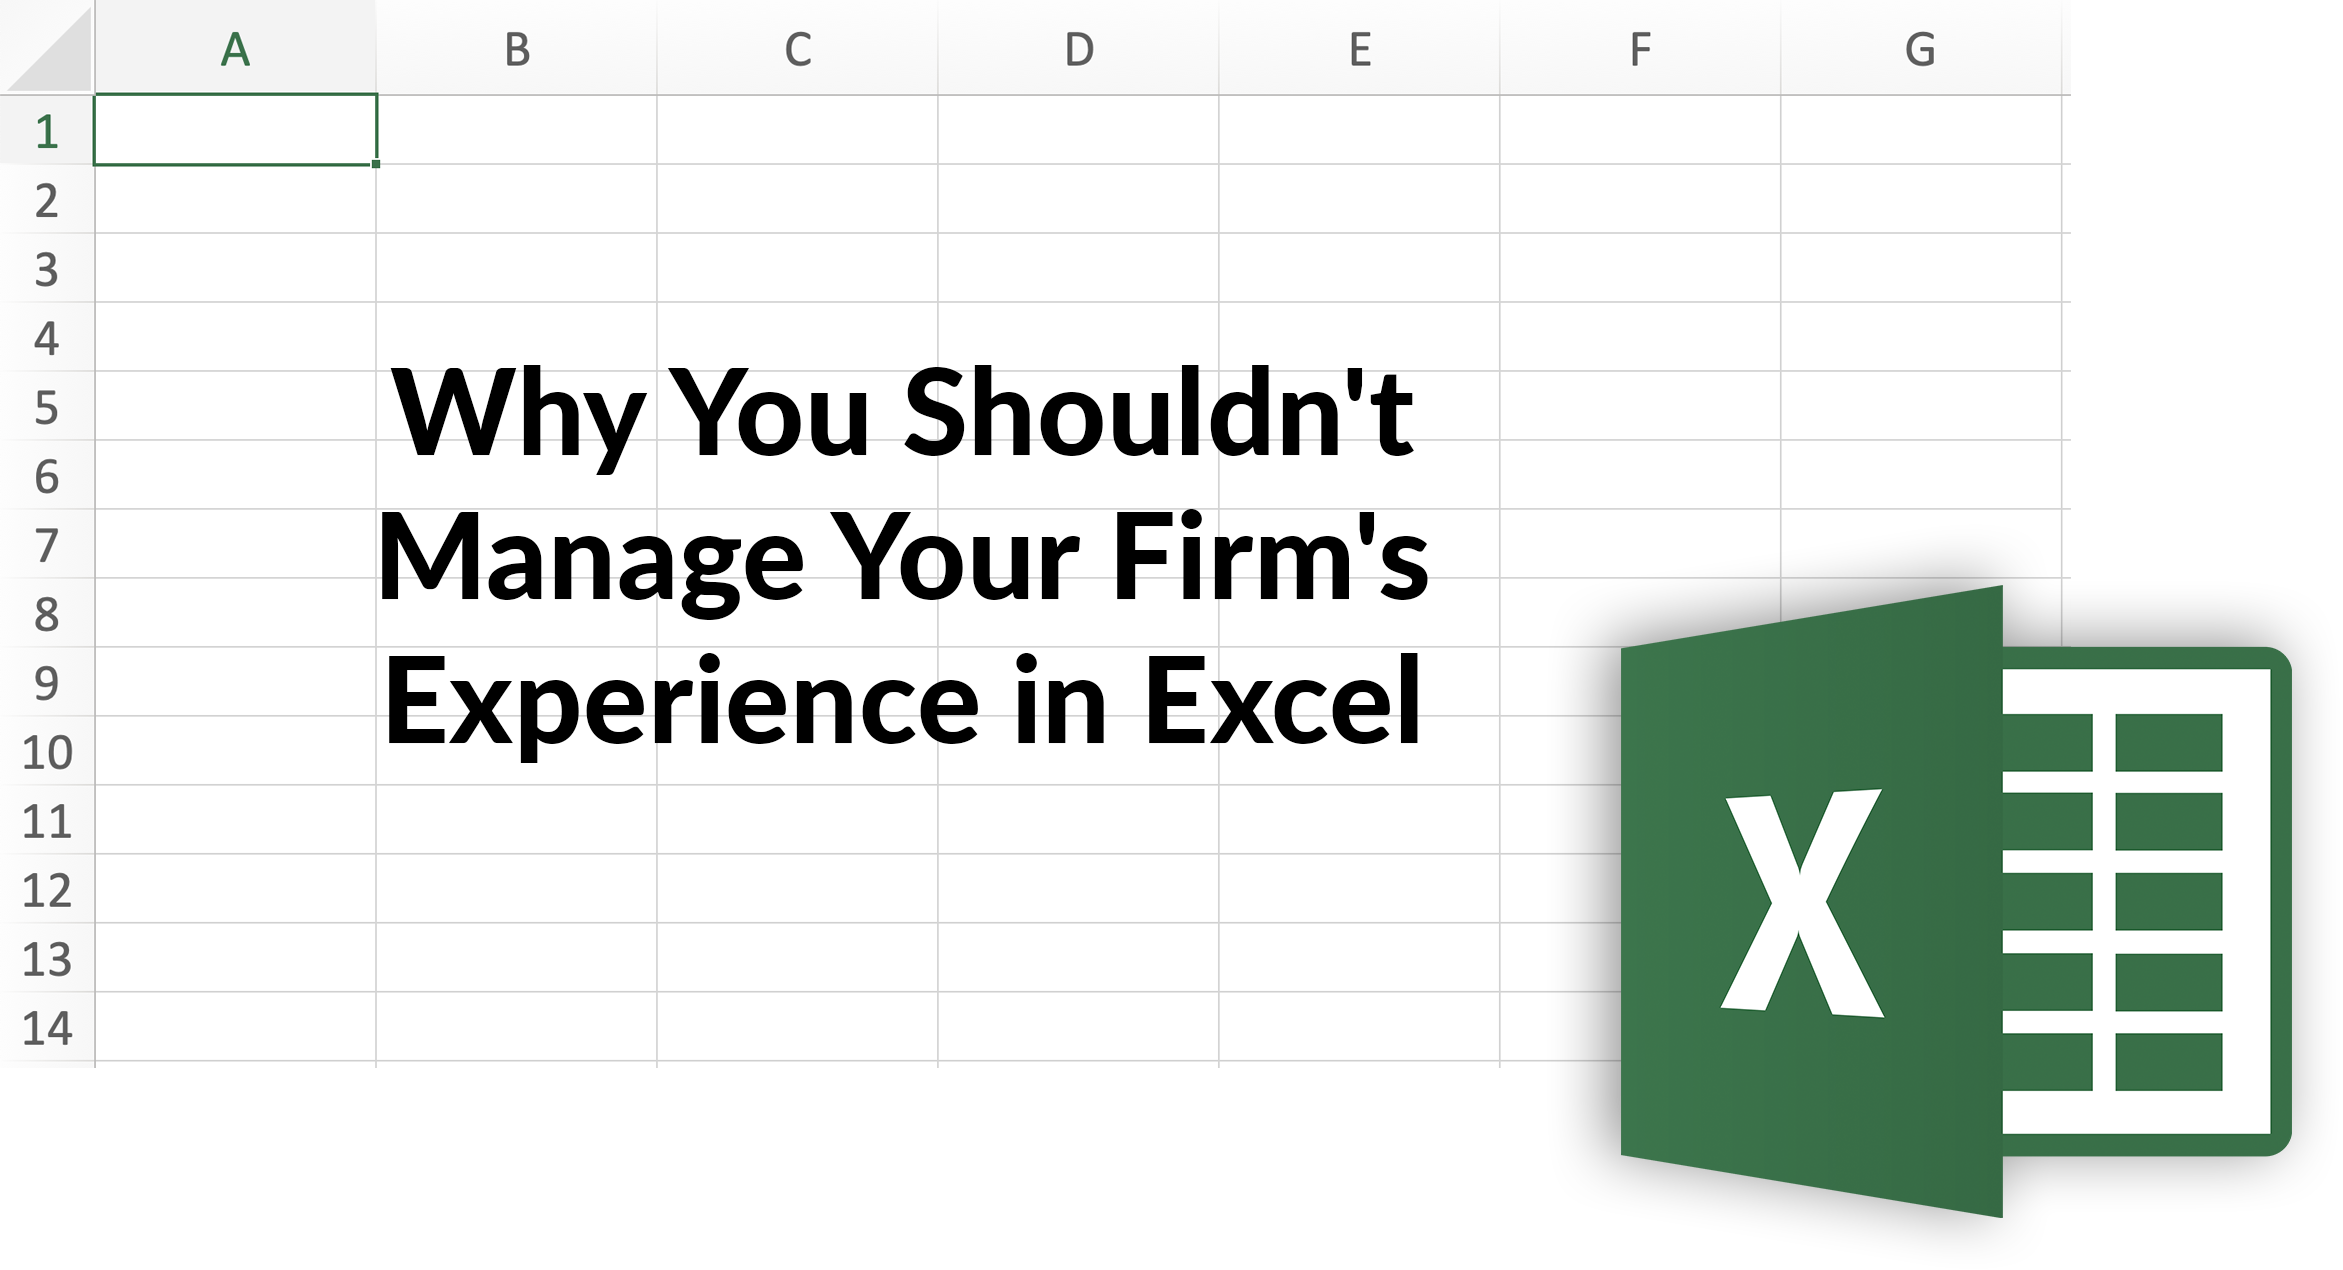 Why you shouldn't manage your firm's experience in Excel